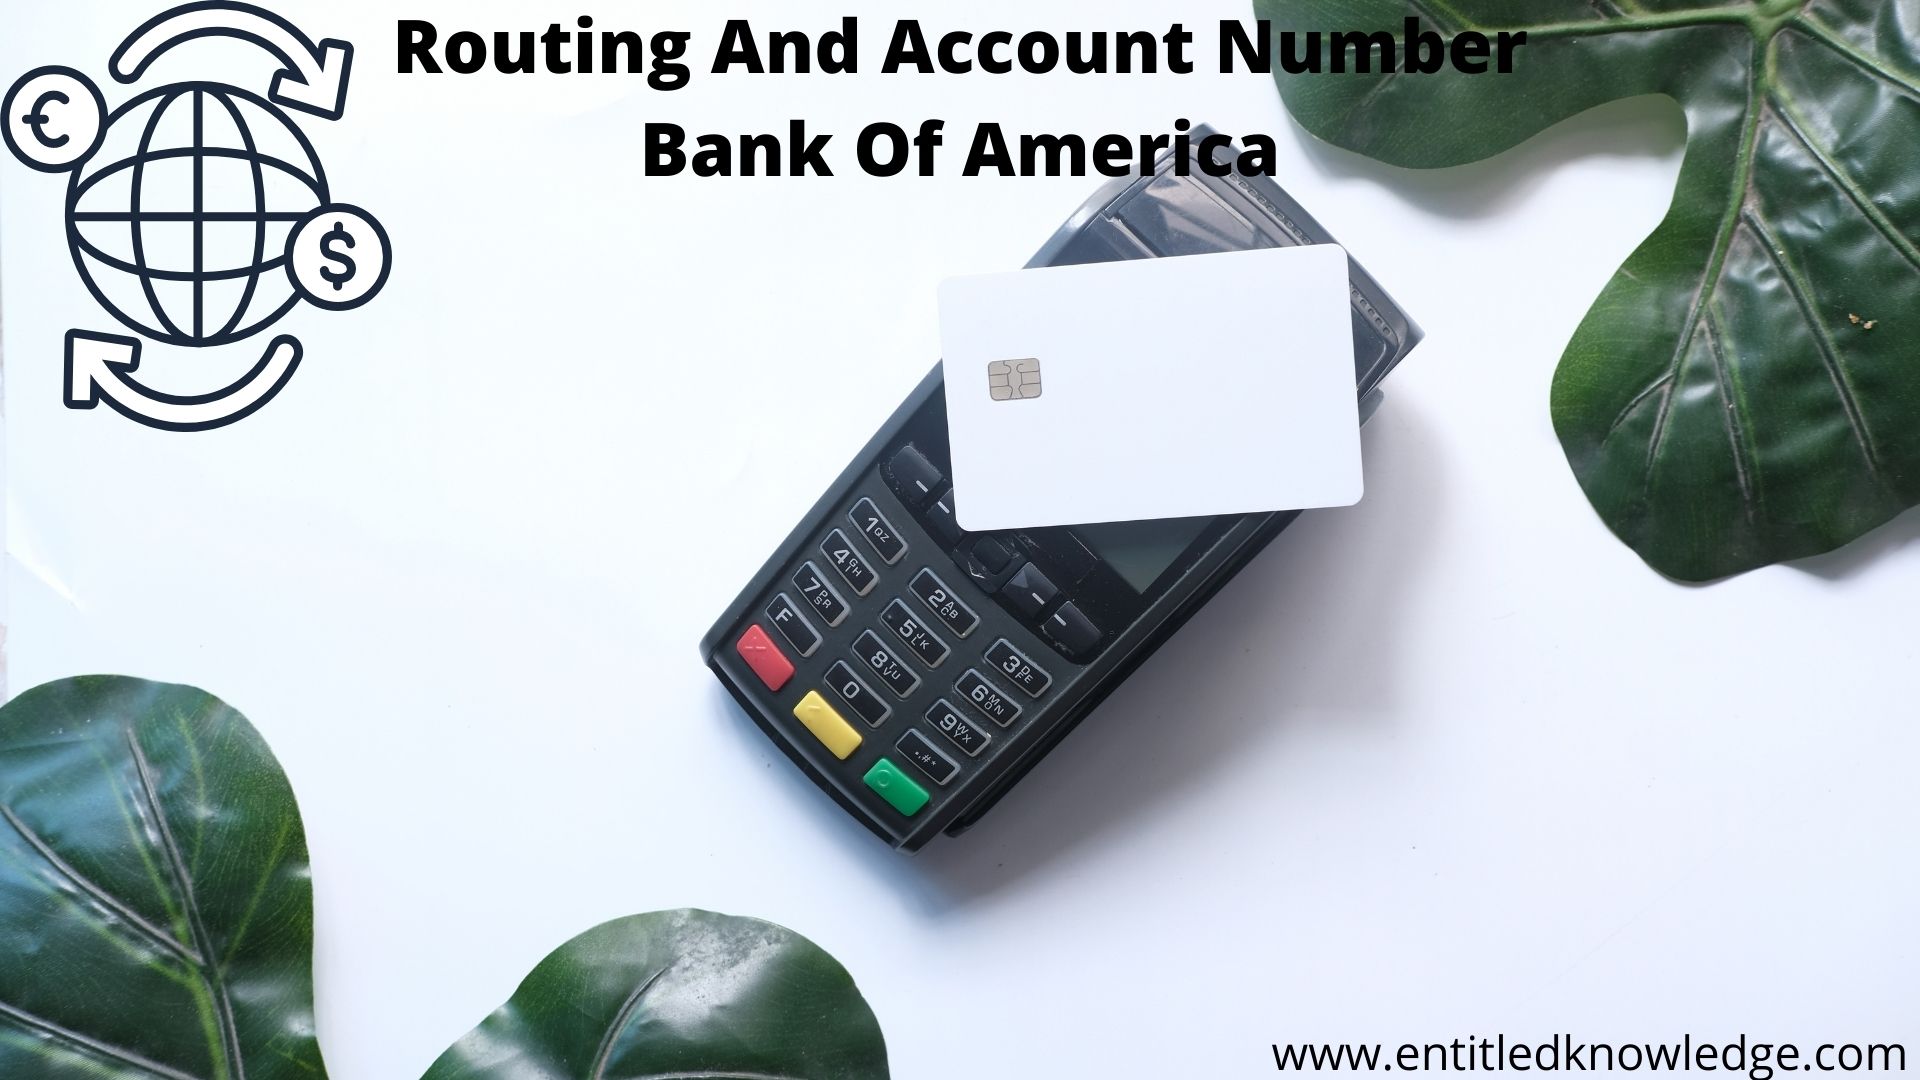 Send Money With Routing And Account Number Bank Of America